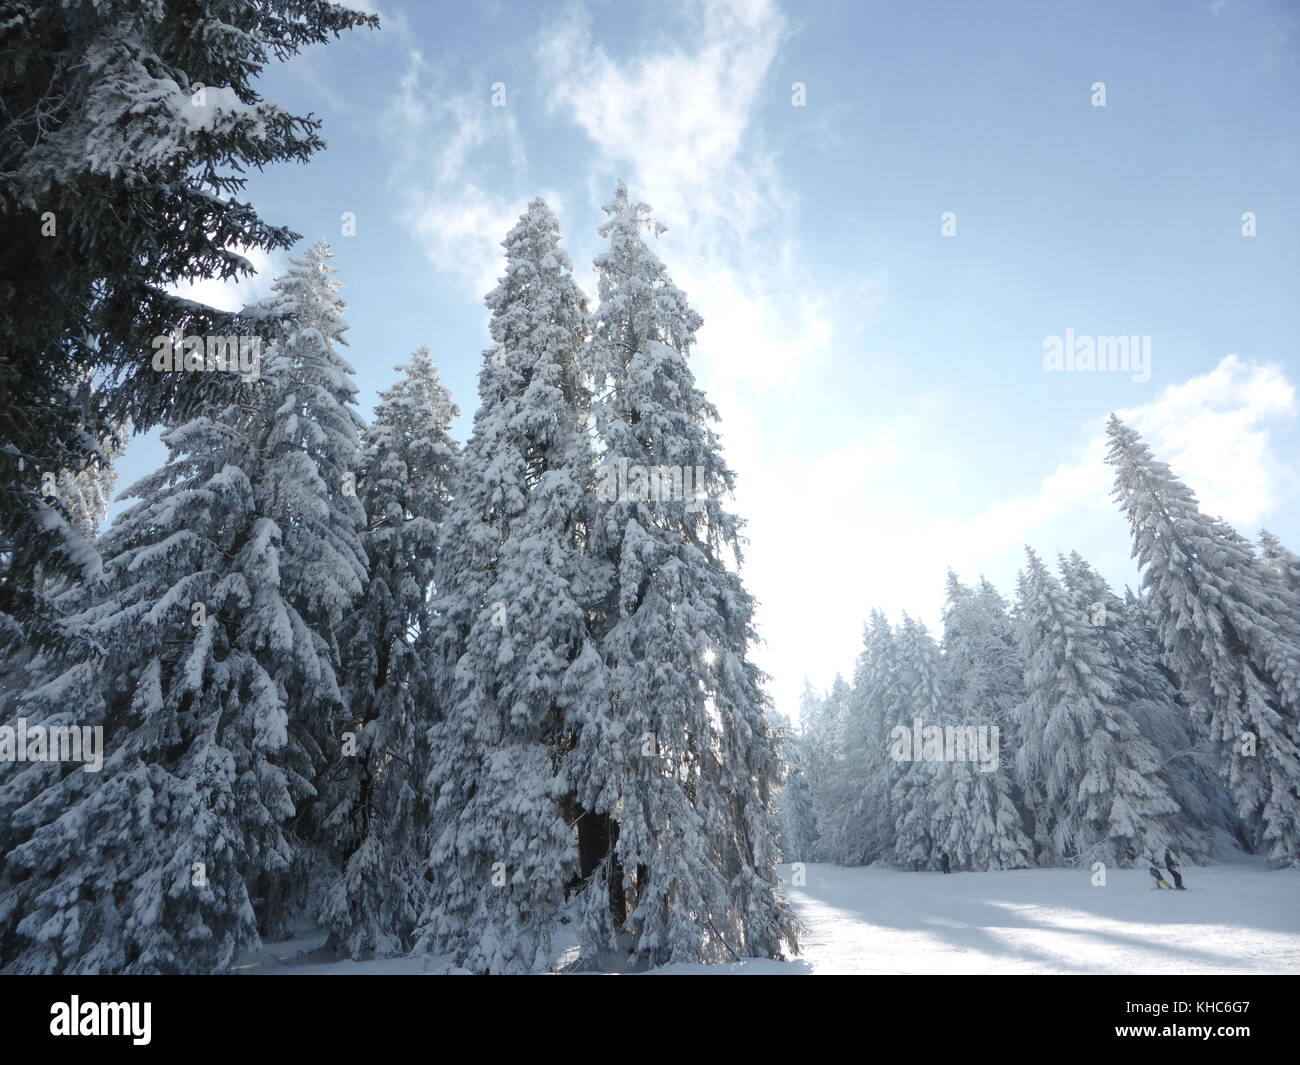 Snow covered trees in Swiss Jura *** Local Caption *** Switzerland, Jura, Les Genevez, Franches Montagnes, snow, trees, ski slope, people, sun Stock Photo